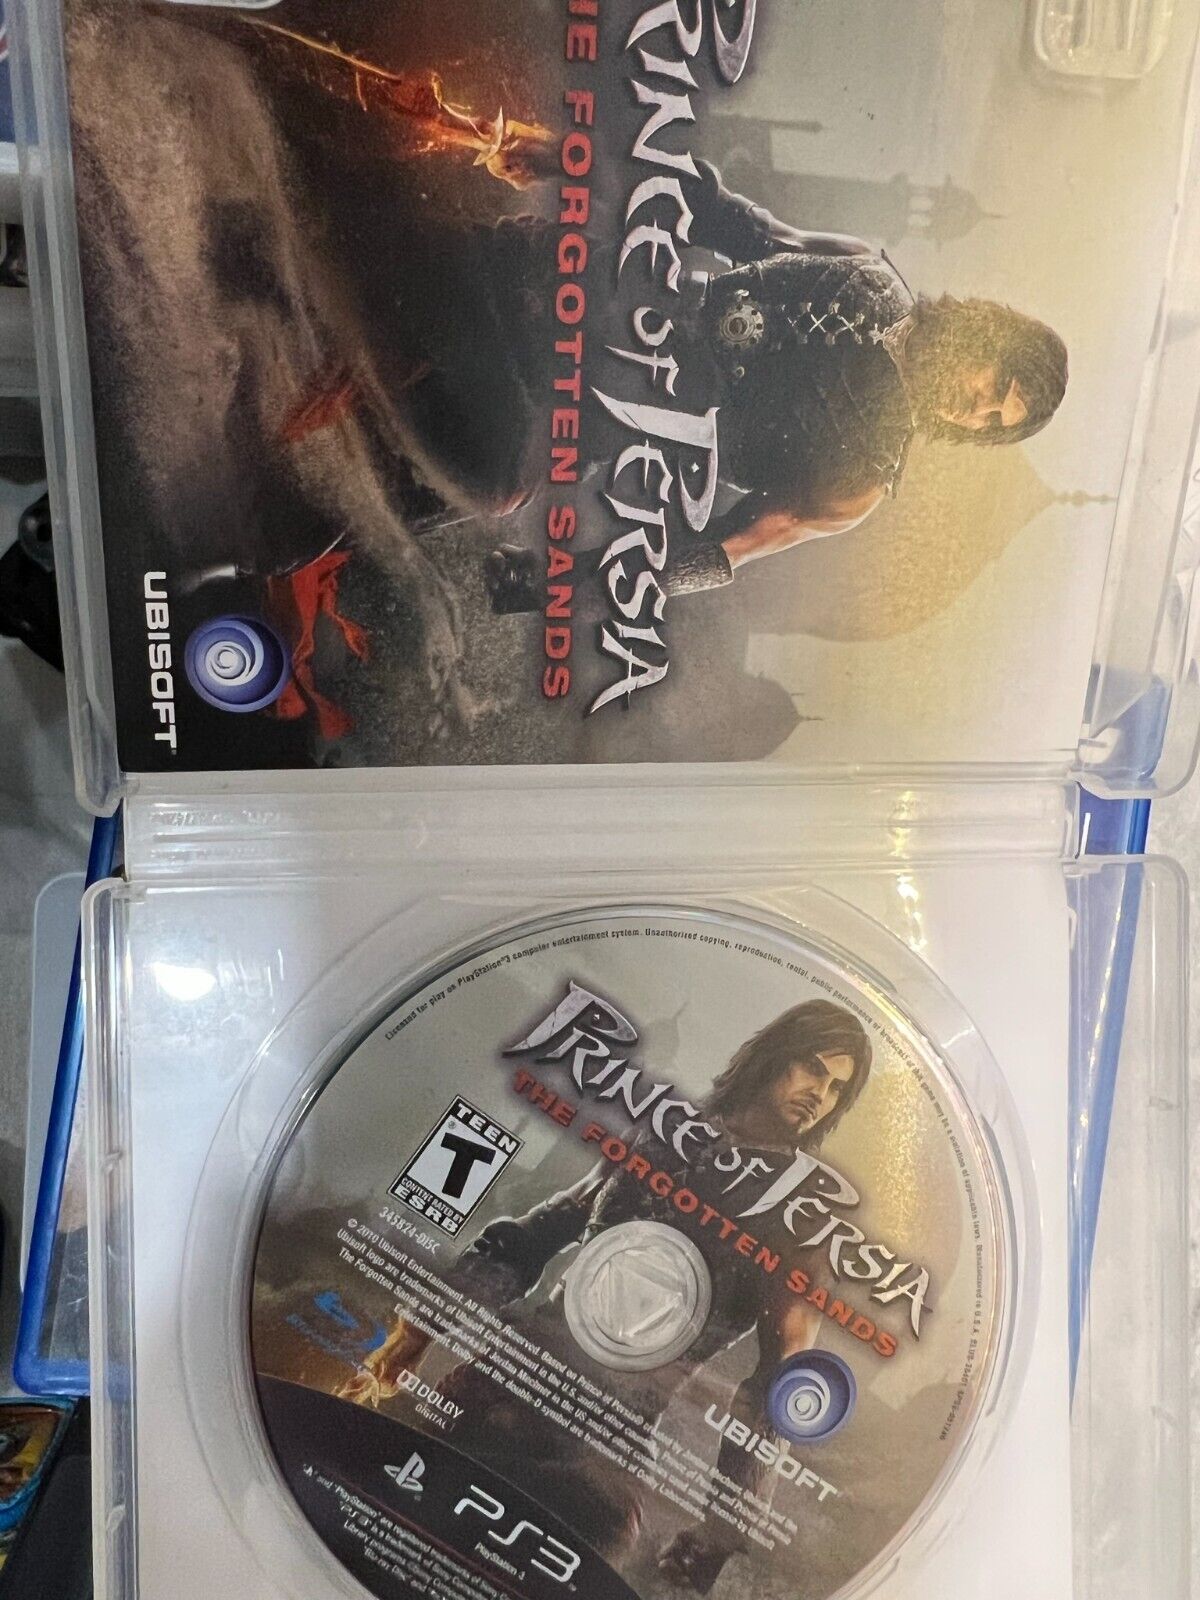 Prince of Persia: The Forgotten Sands (Sony PlayStation 3, 2010)